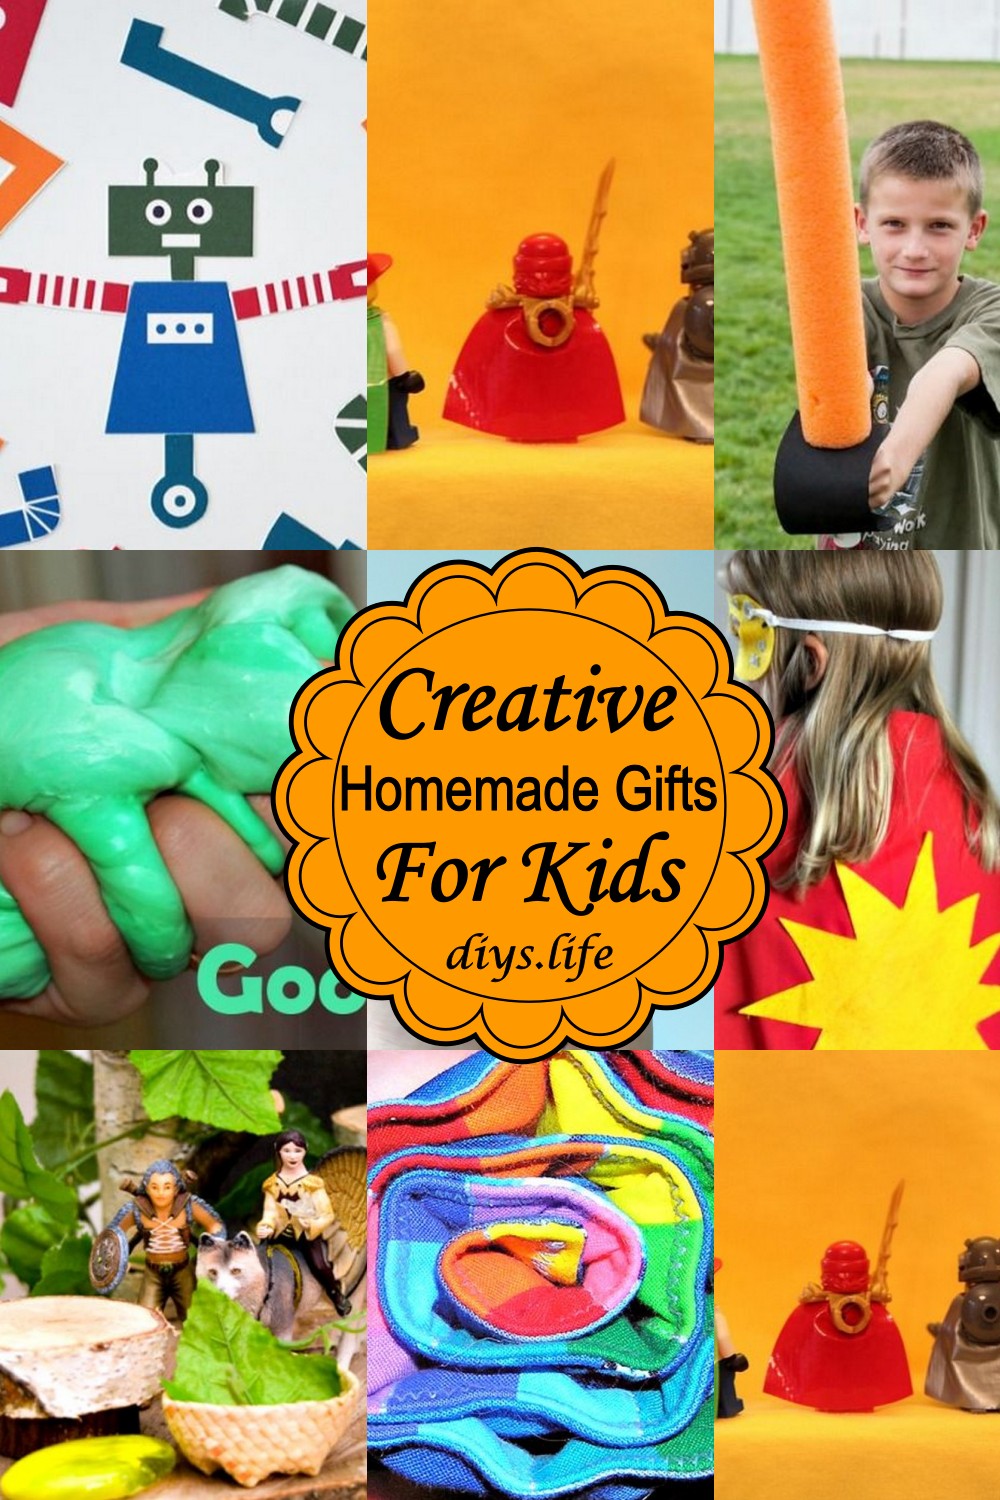 Creative Homemade Gifts For kids